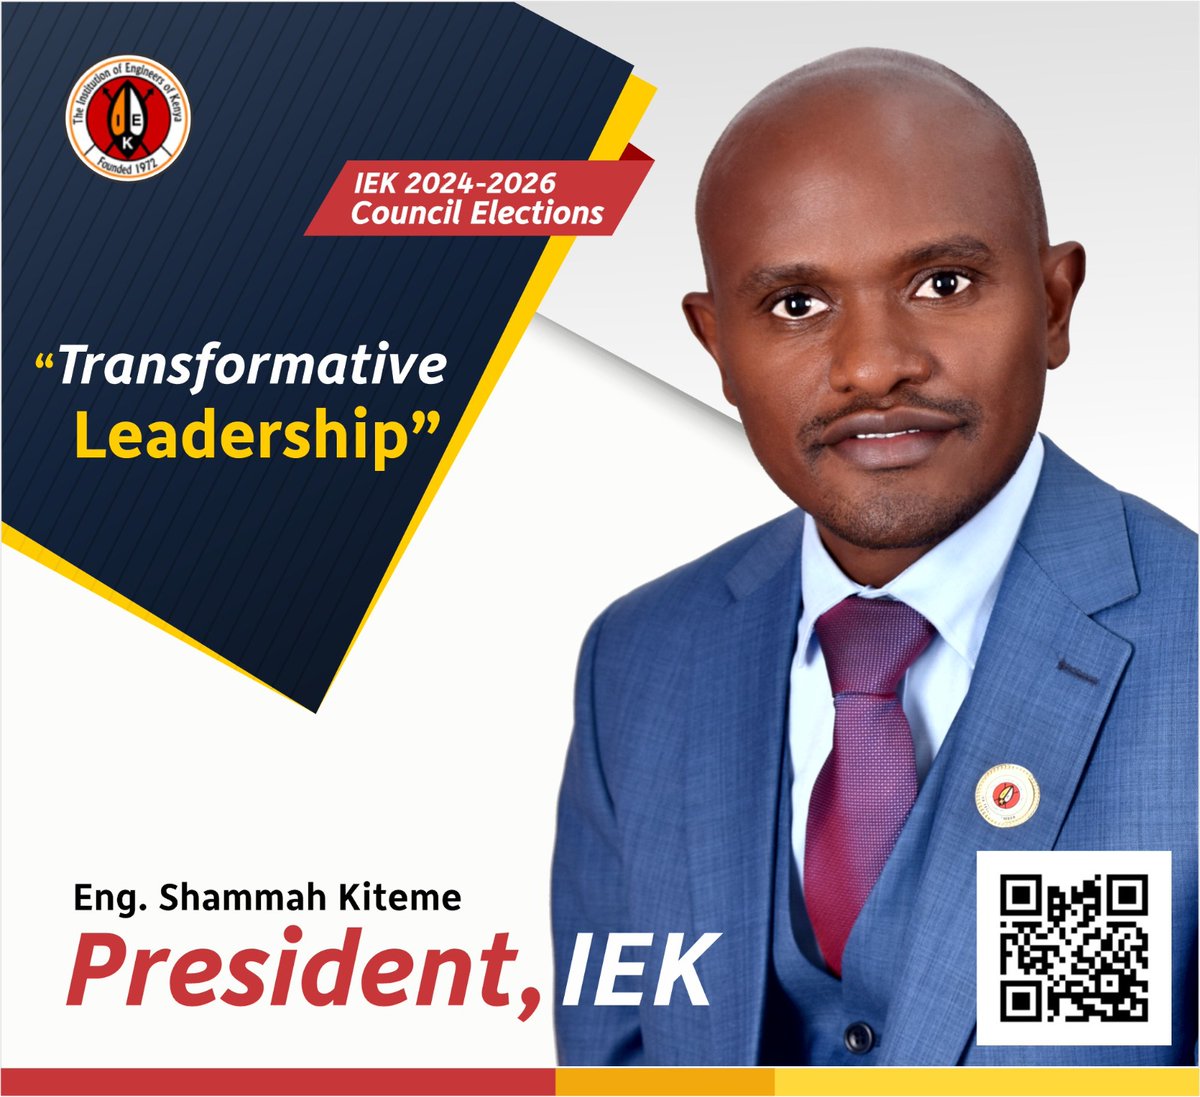 Dear Esteemed Engineers I humbly request on 21st March 2024 we turn up in large numbers and elect Eng @shammahkiteme for the position of President. He is a true transformative leader who delivered the strategic vision of this noble institution for the next 5 years.@TheIEK